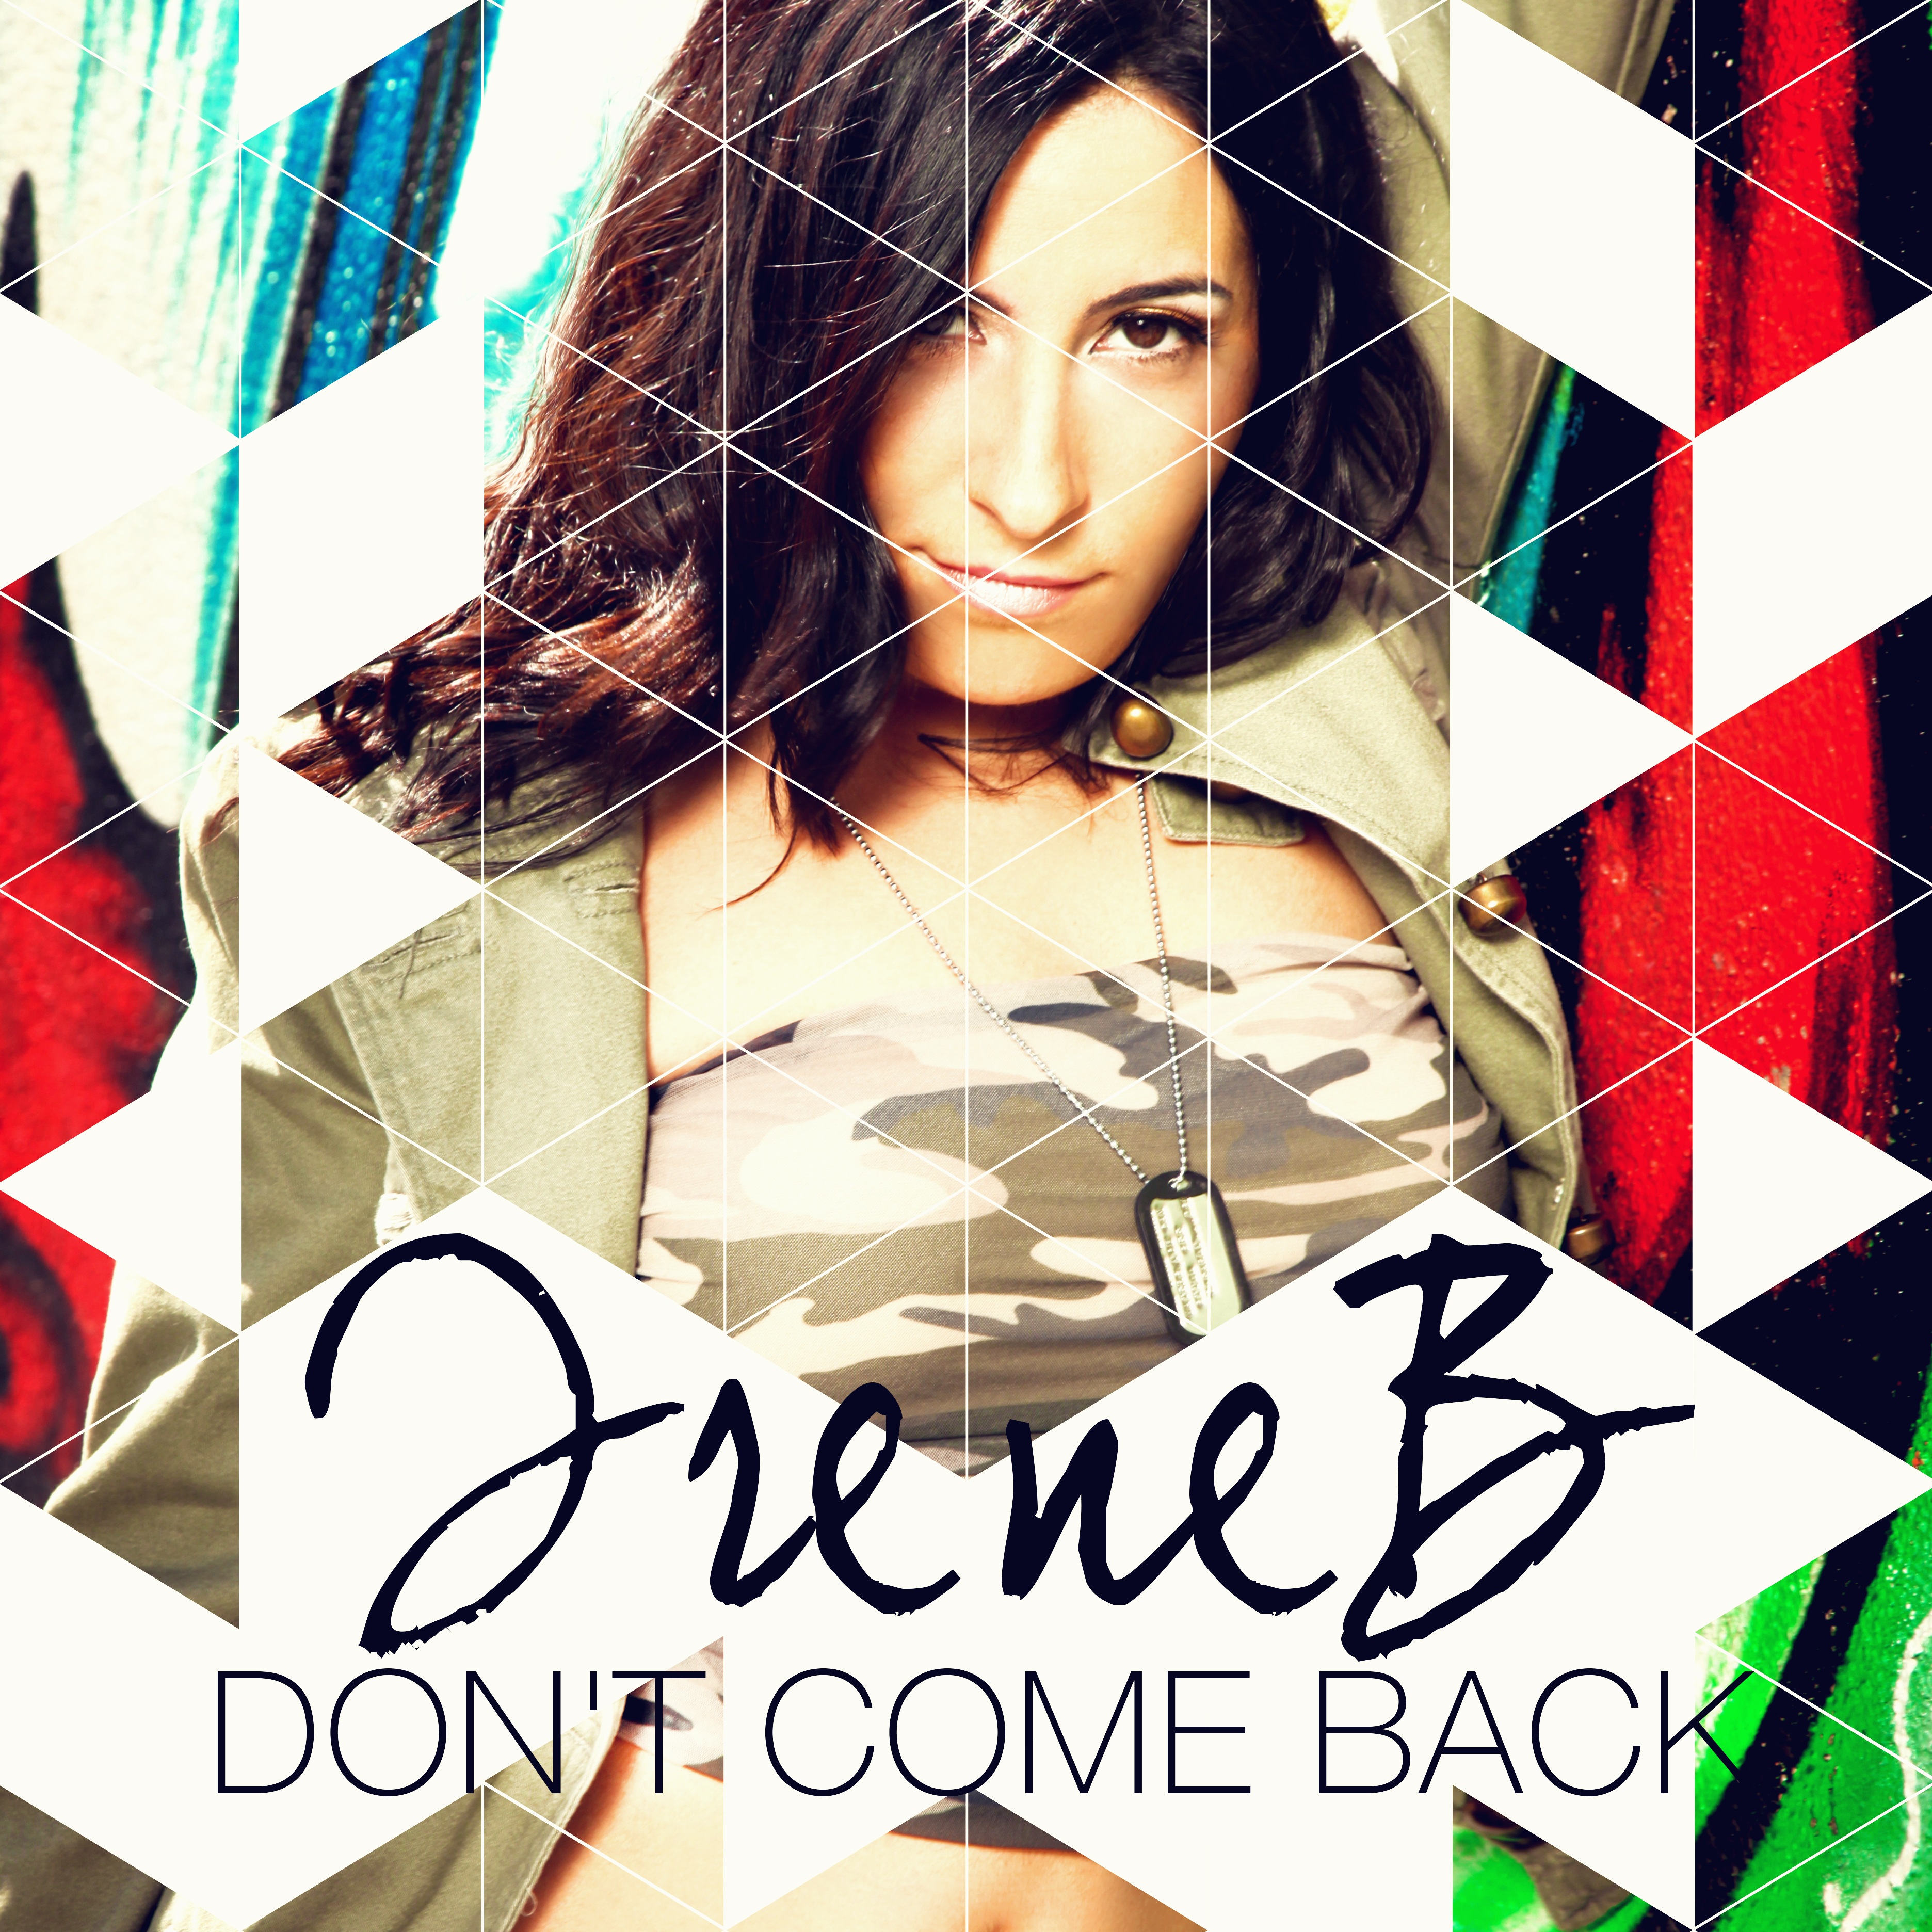 IreneB releases “Don’t Come Back”, third single from her latest album, Welcome Back